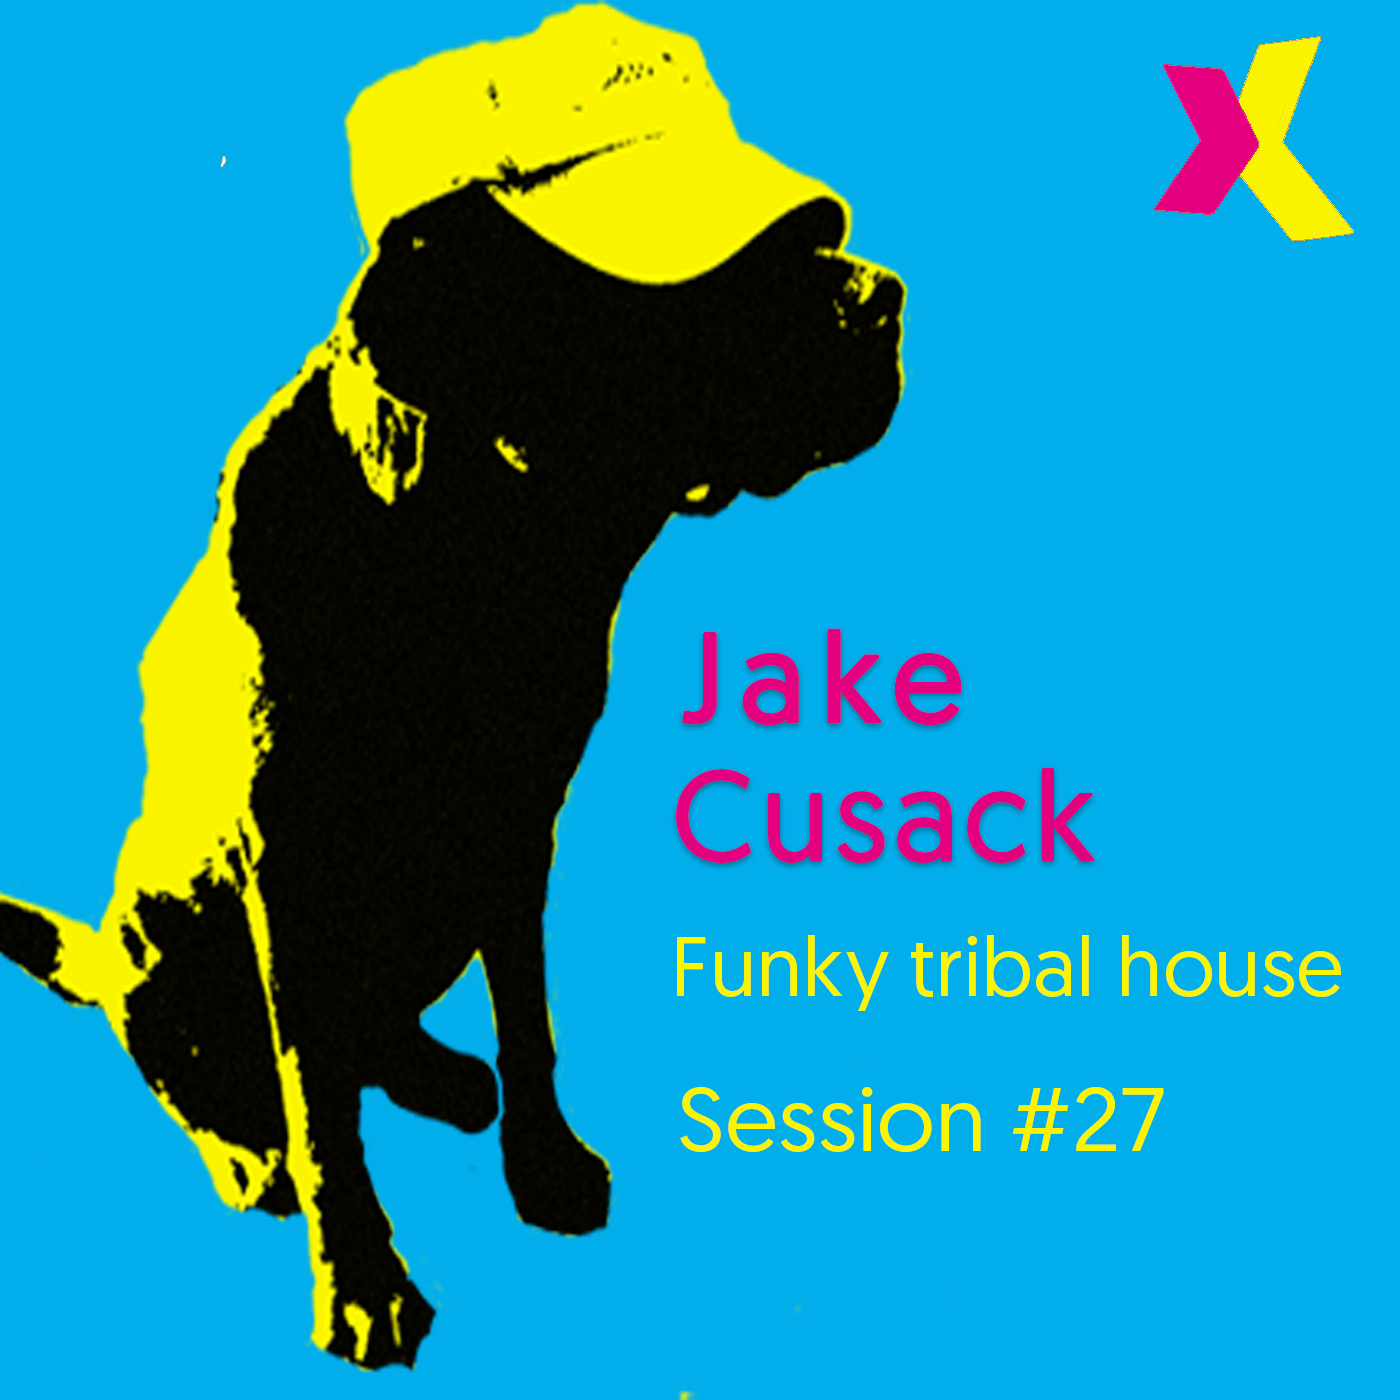 Jake Cusack - Funky tribal house - Session 27